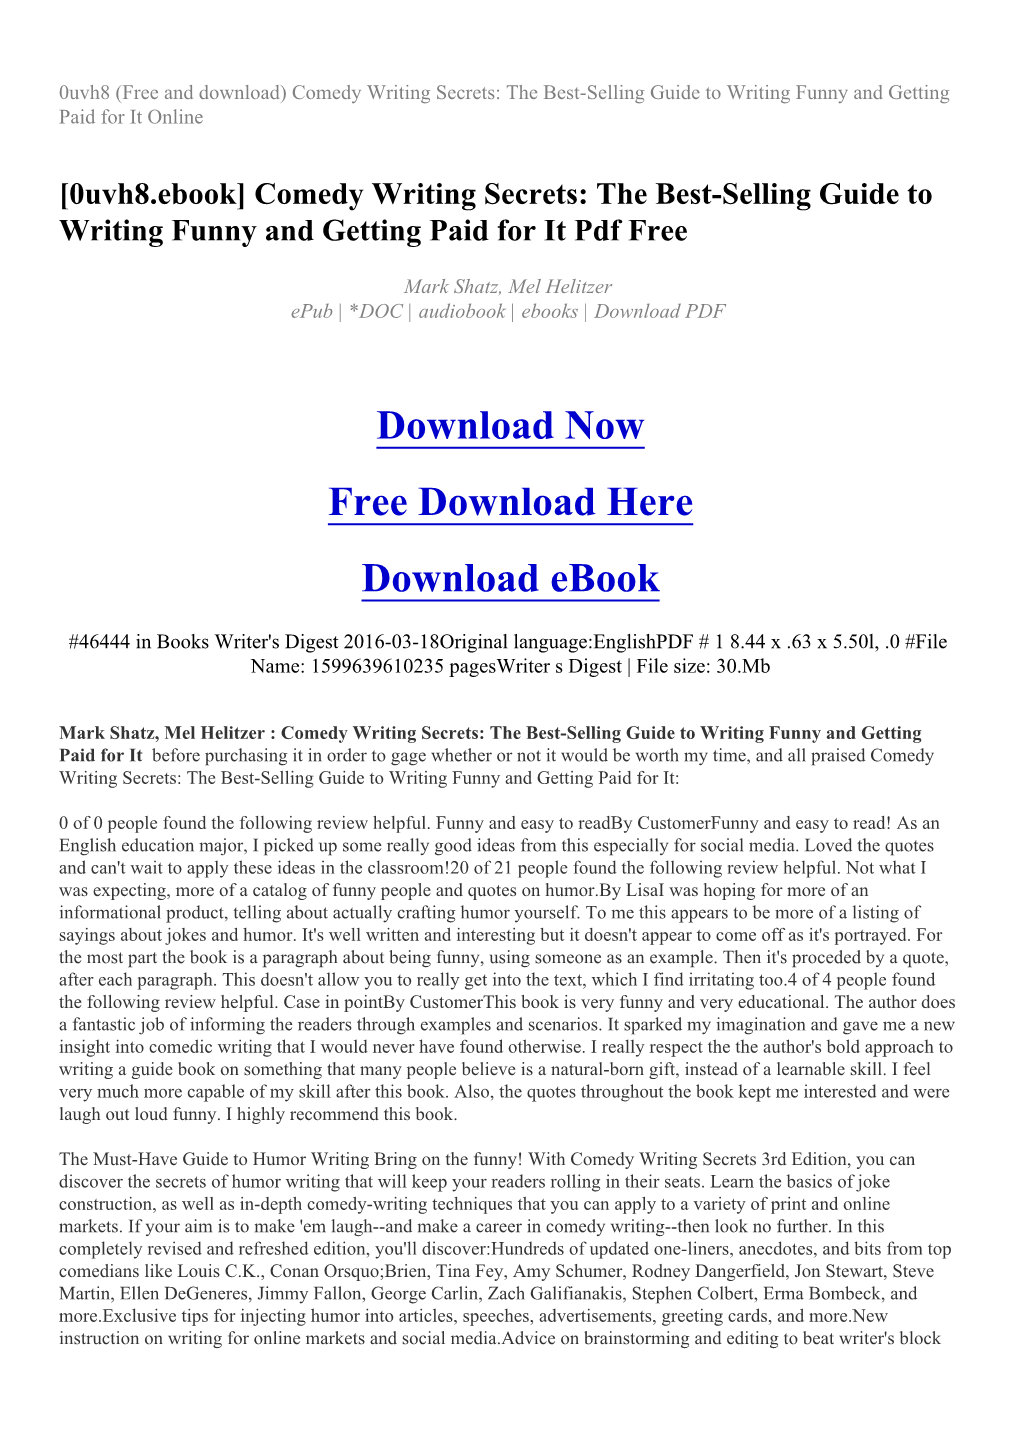 [0Uvh8.Ebook] Comedy Writing Secrets: the Best-Selling Guide to Writing Funny and Getting Paid for It Pdf Free